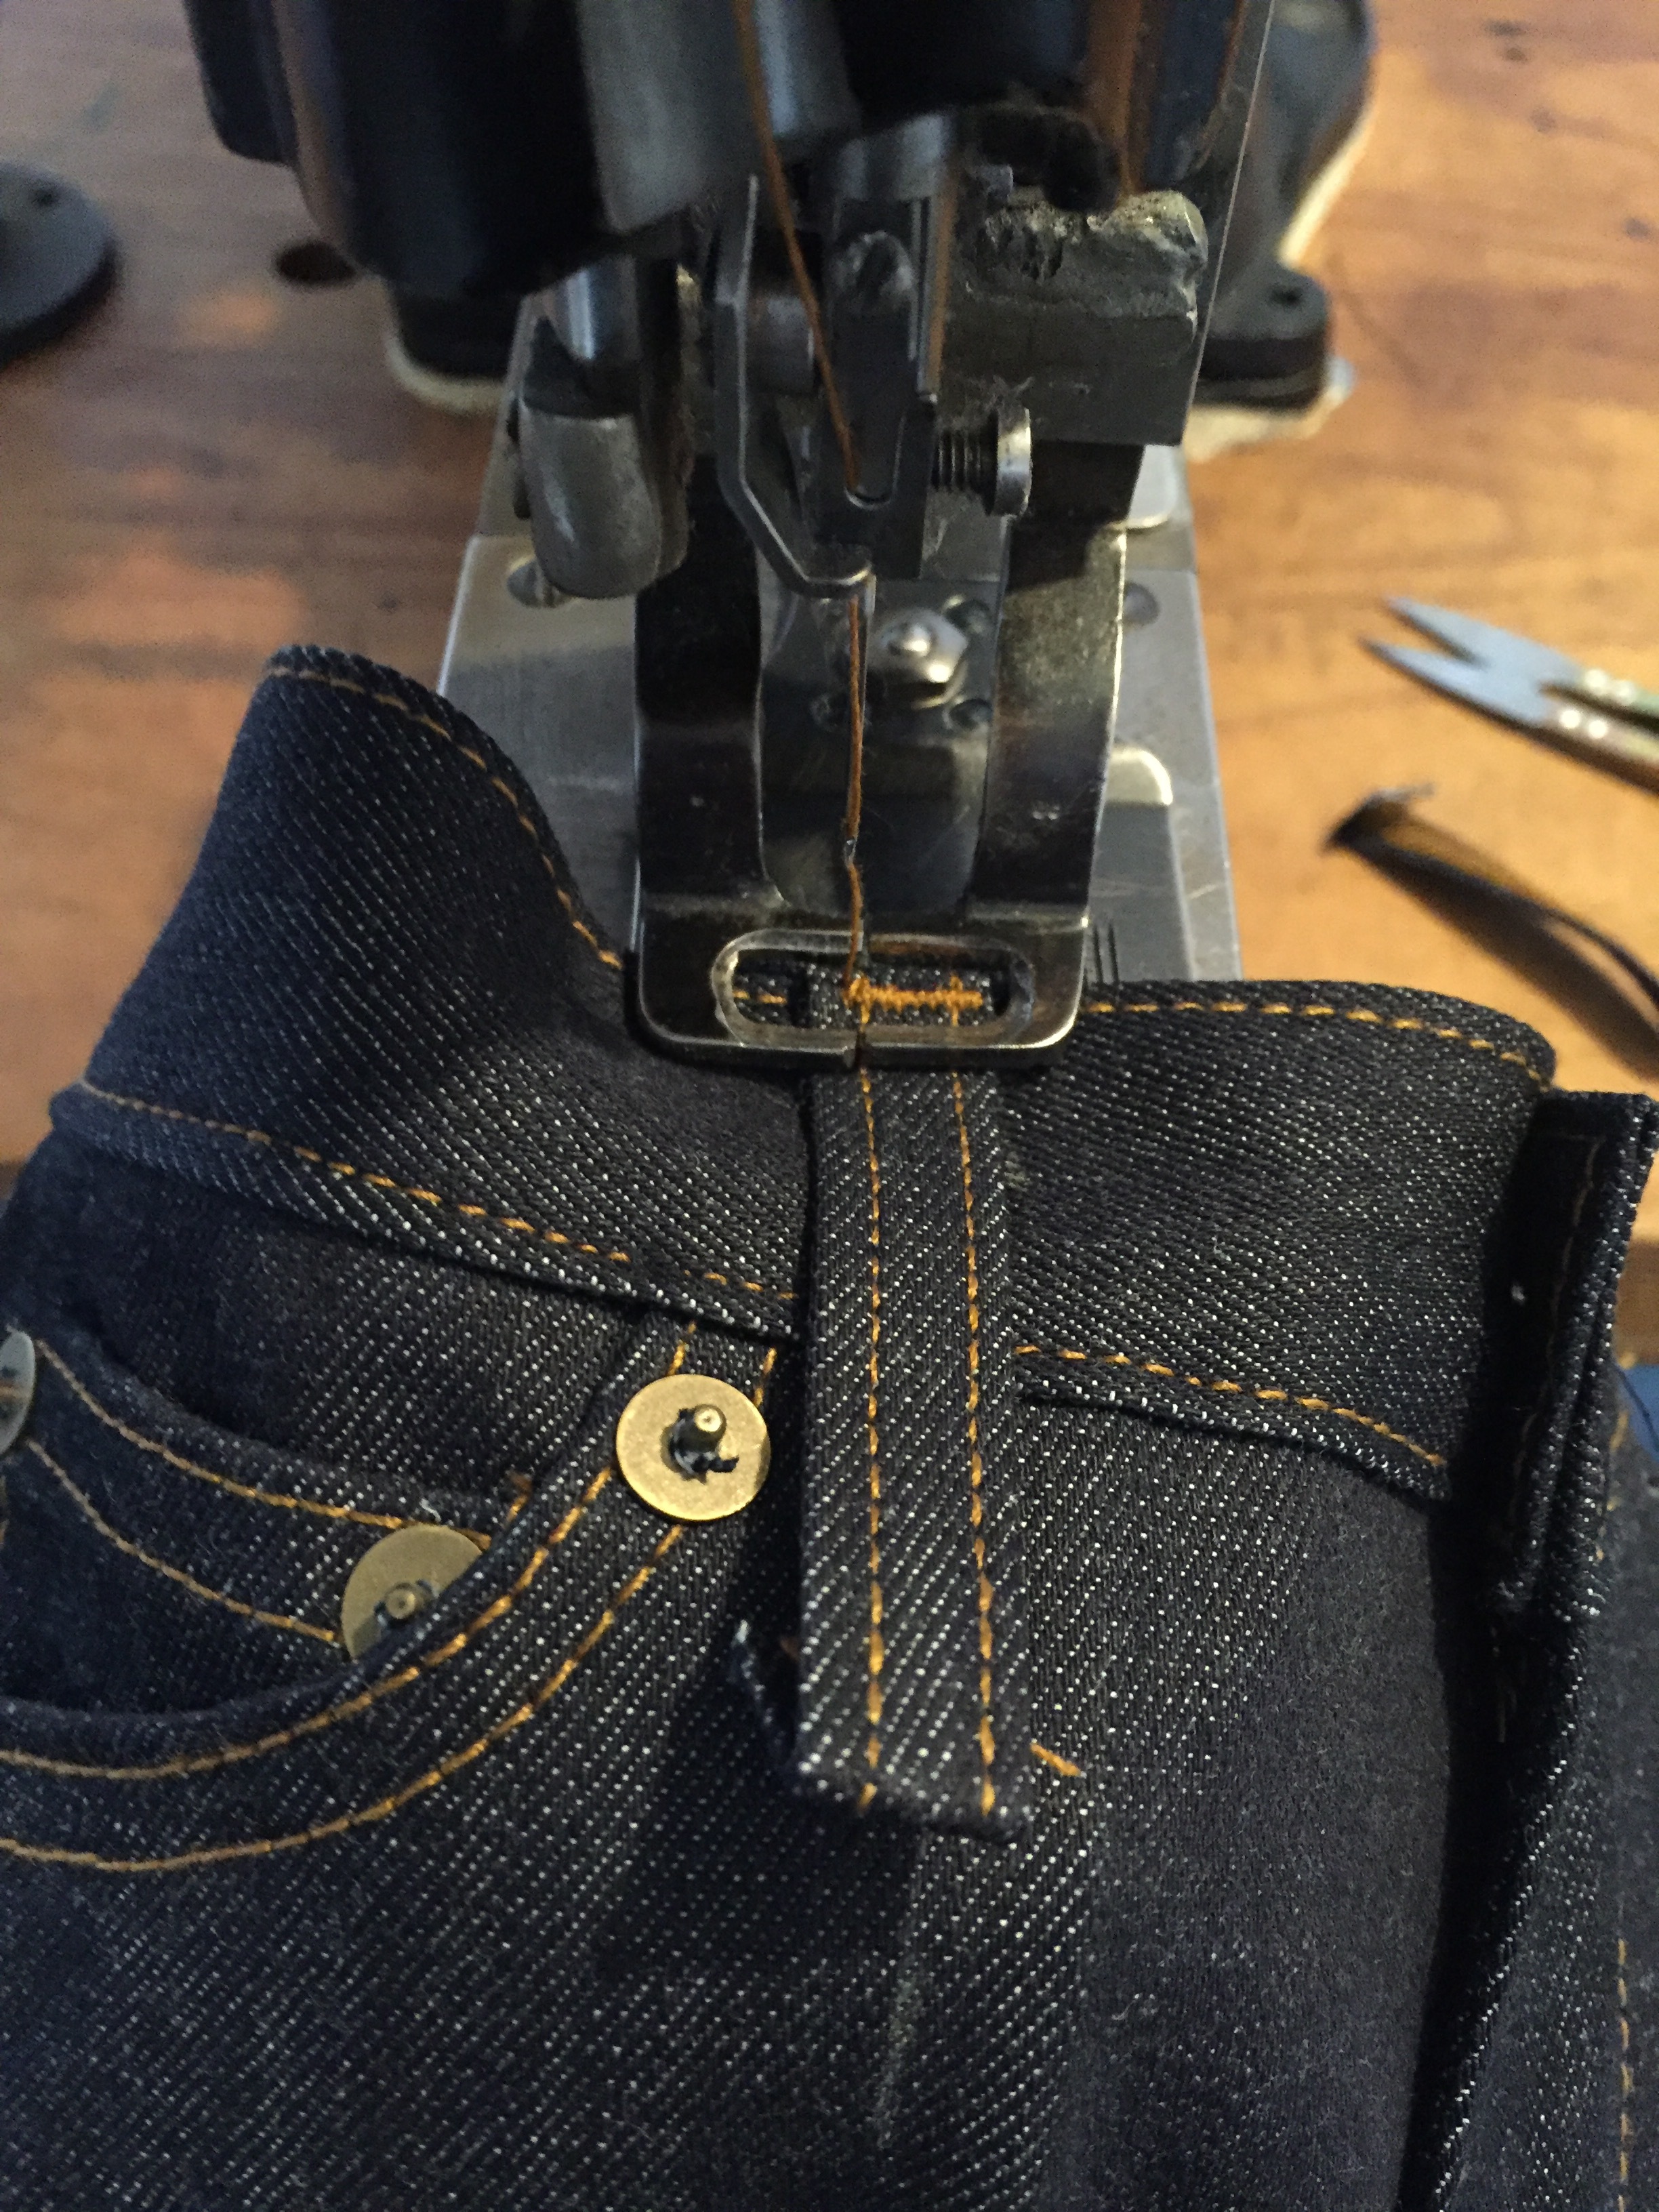 sewn-goods-sample-making-sewing-selvage-denim-jeans-1